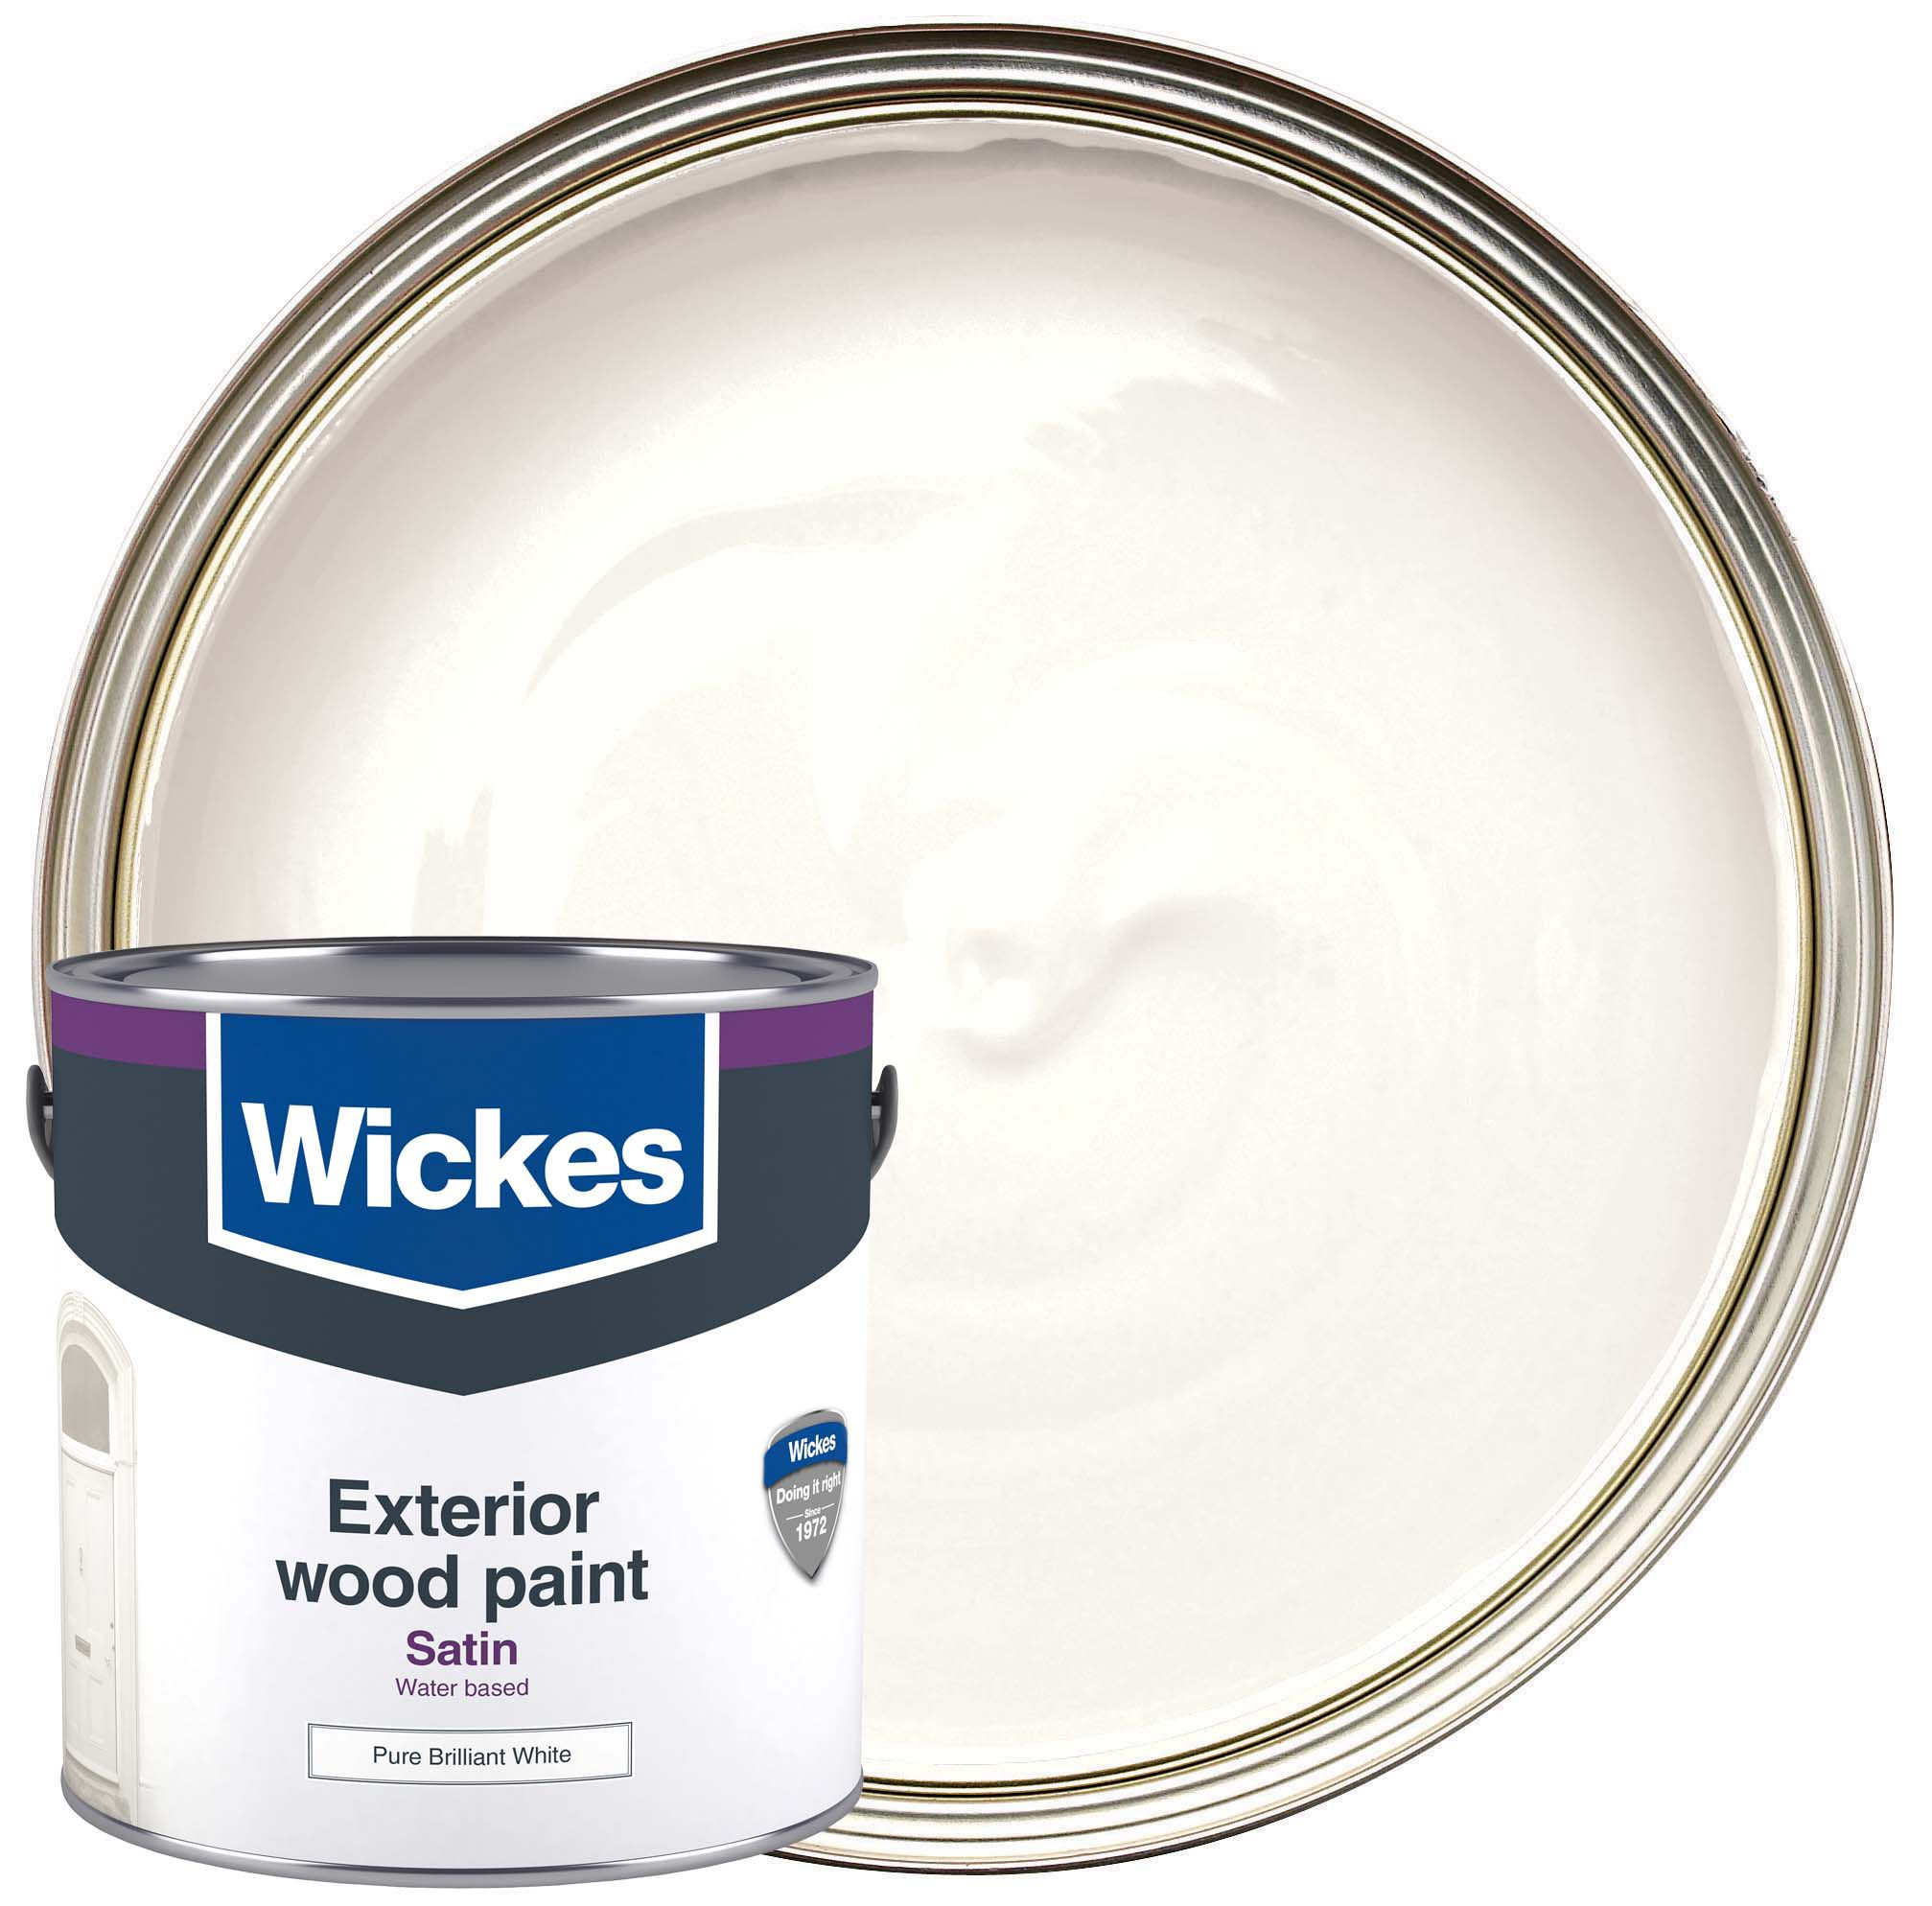 Image of Wickes Exterior Satinwood Paint Pure Brilliant White 2.5L